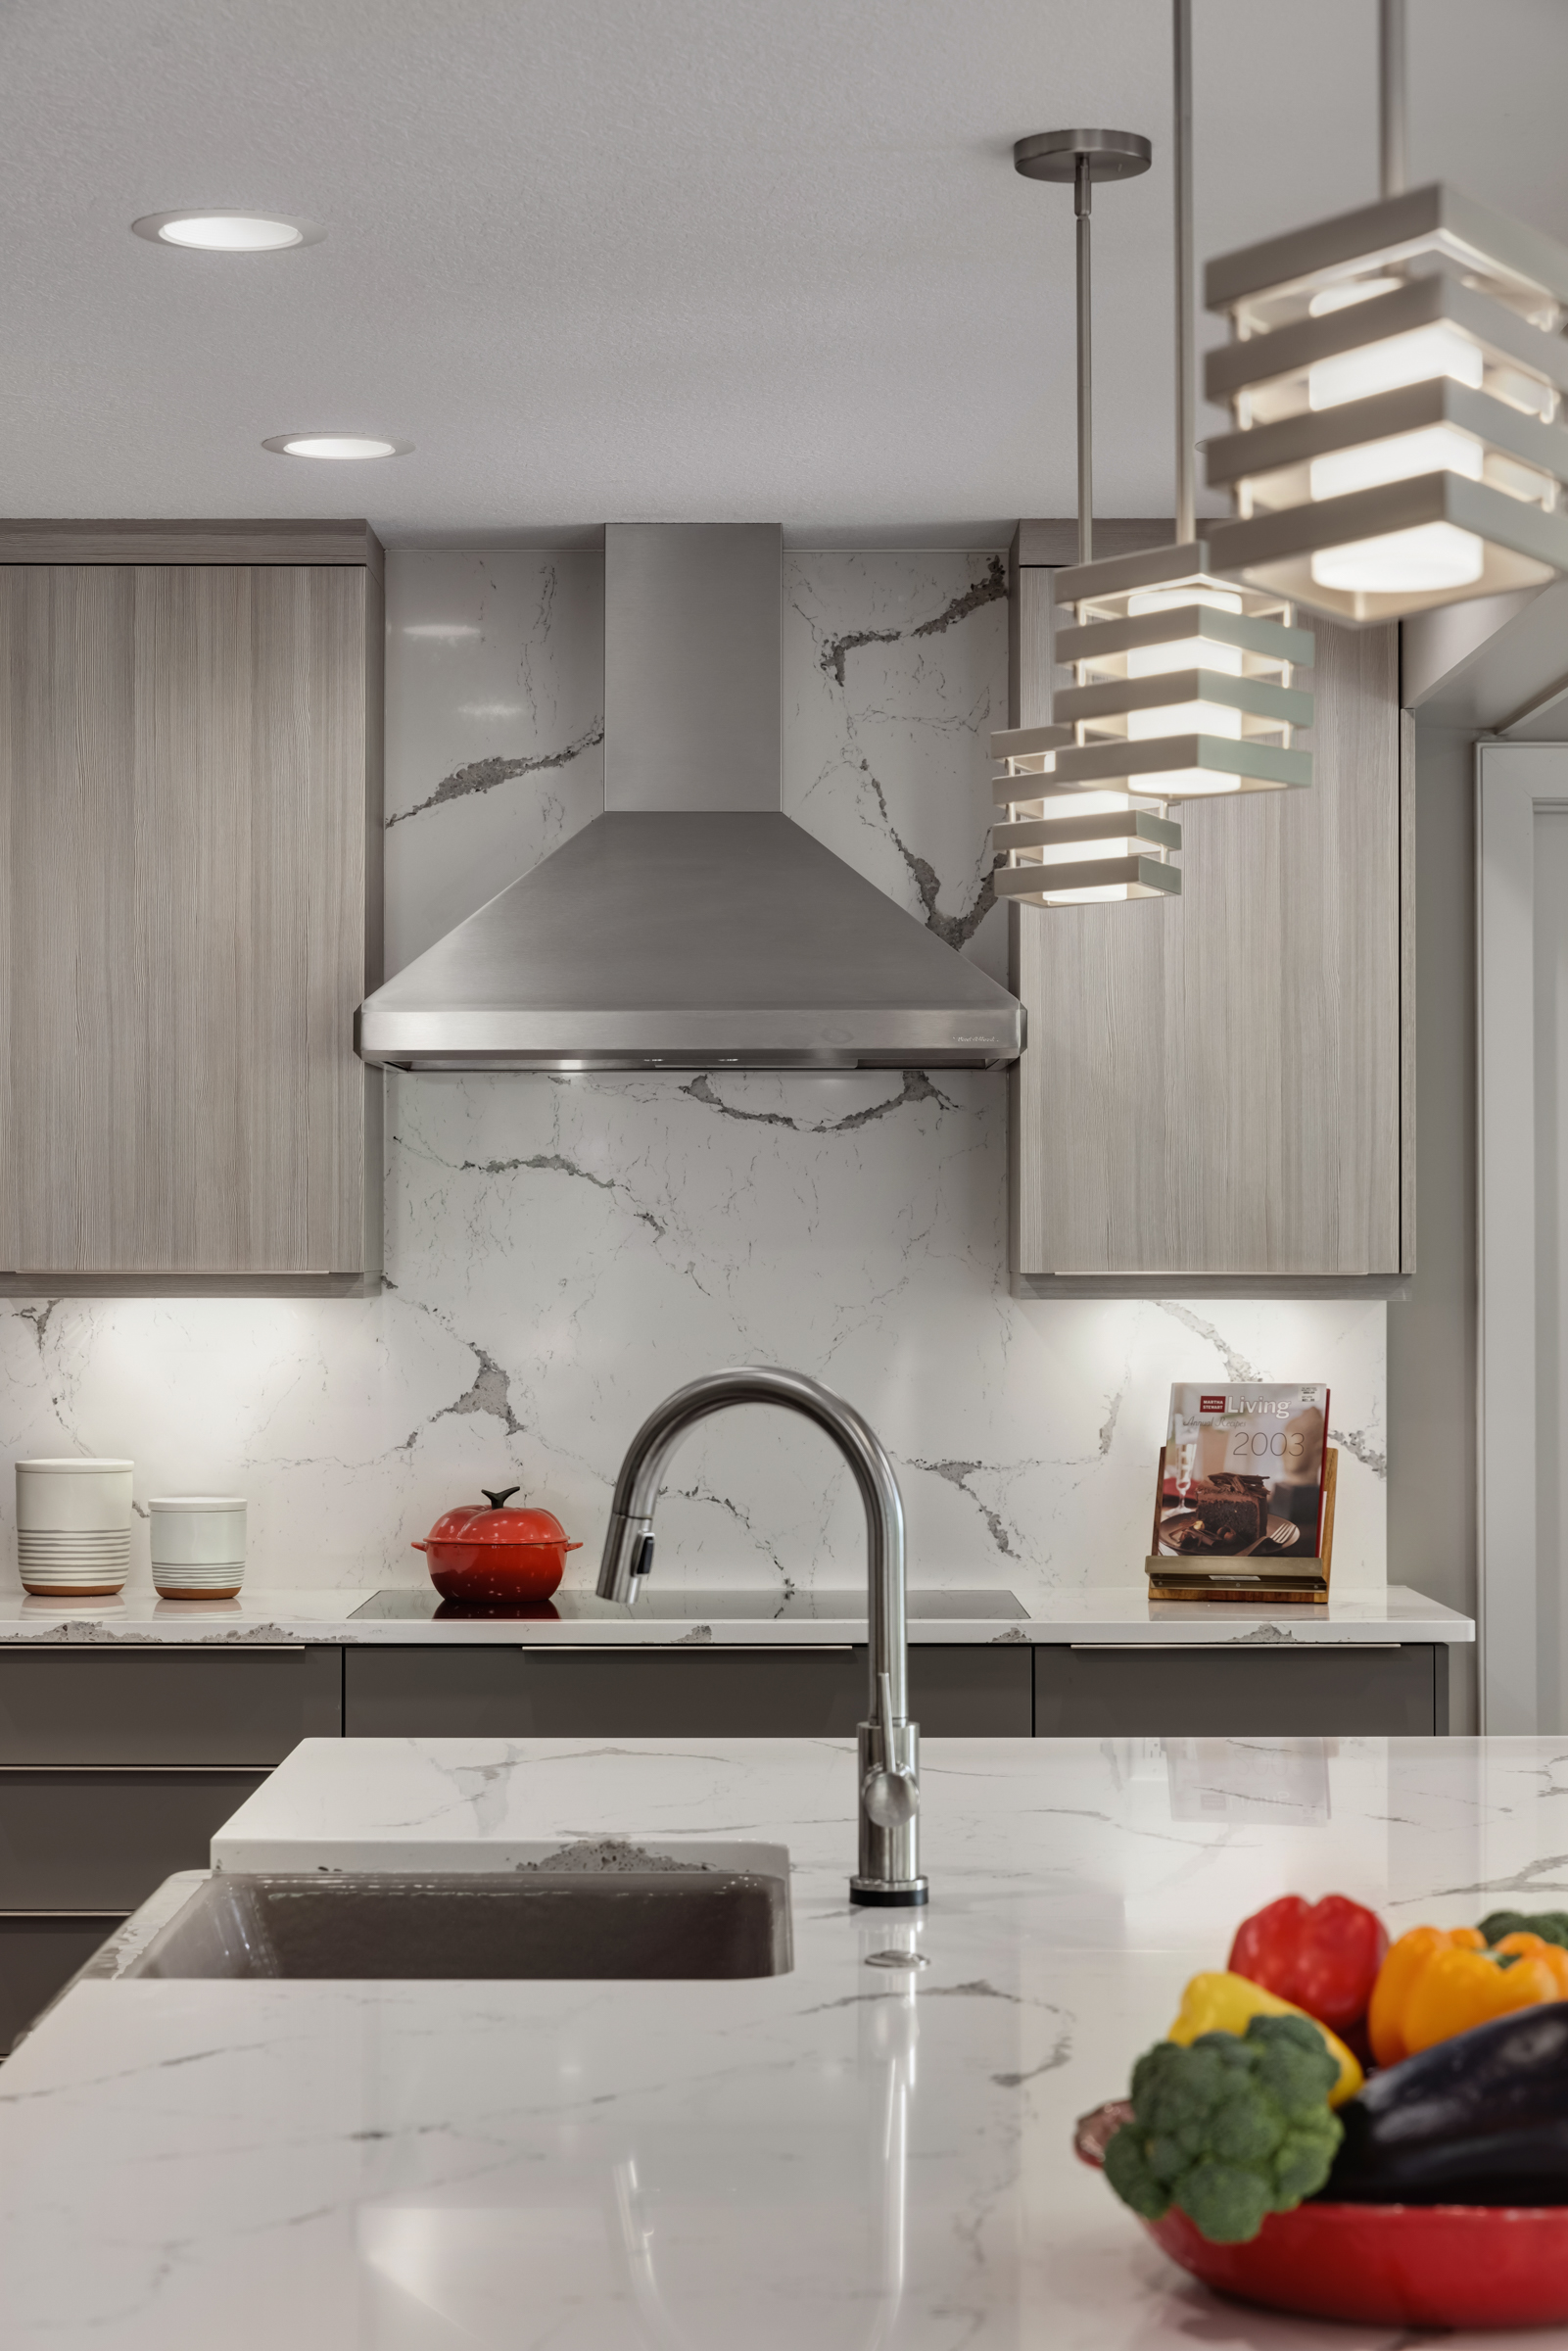 Contemporary kitchen remodel with stainless hood, light wood cabinets, and full height marble backsplash